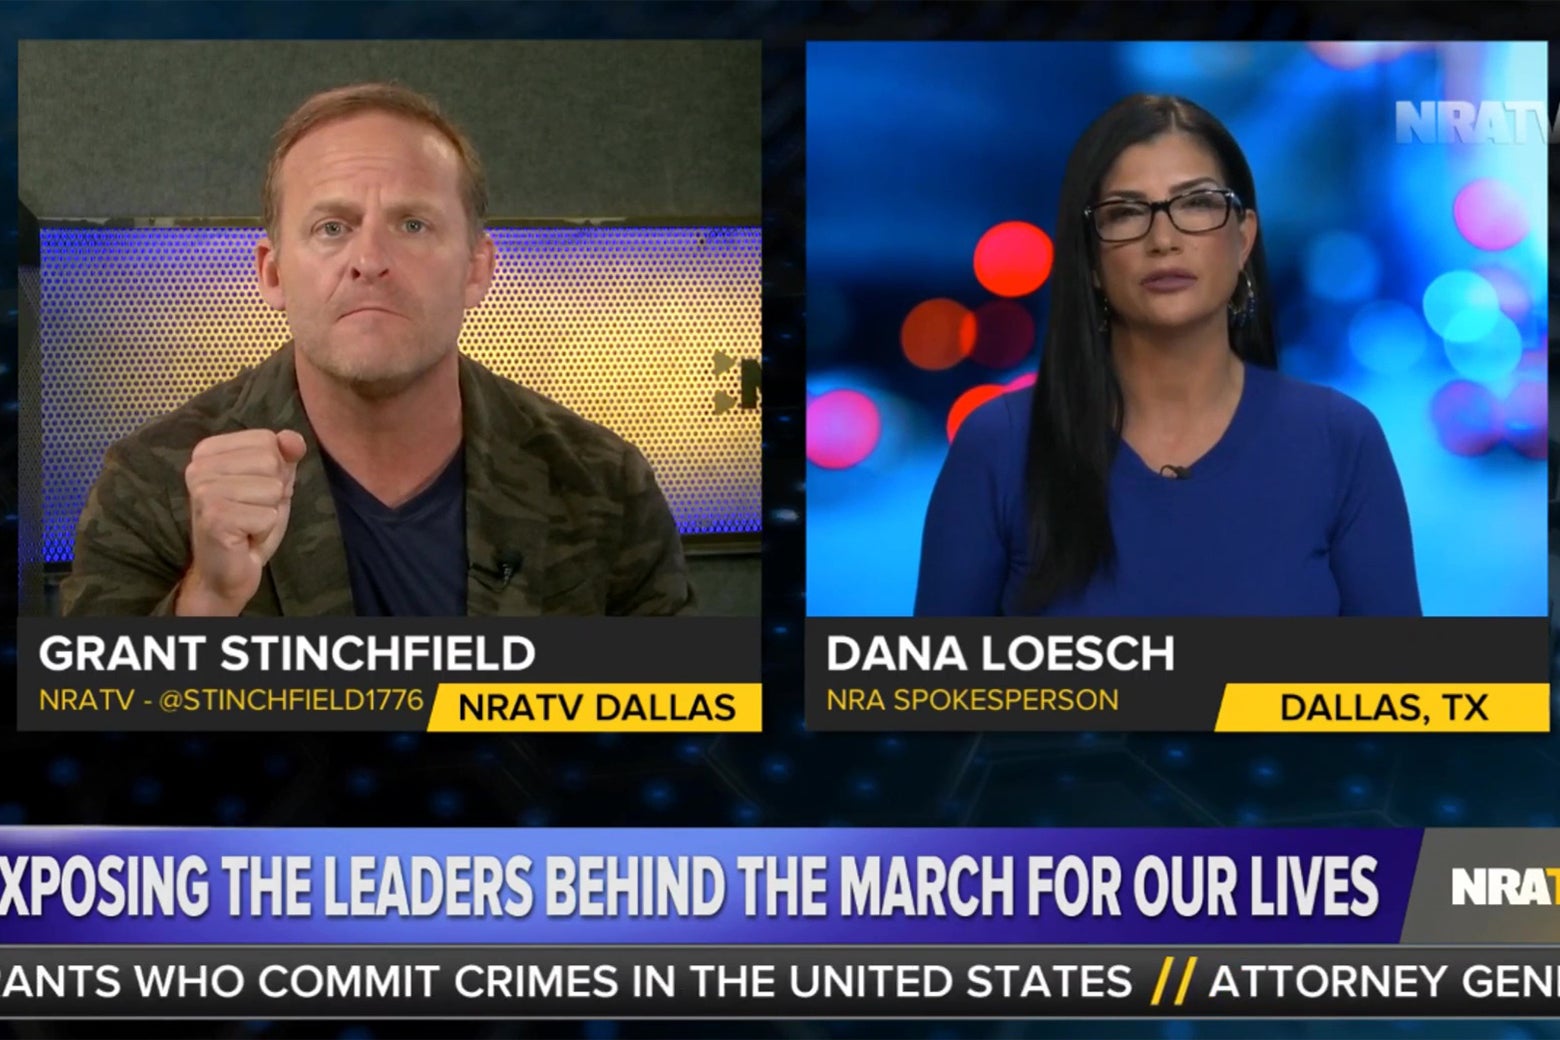 Grant Stinchfield and Dana Loesch discuss the March for Our Lives on NRA TV.